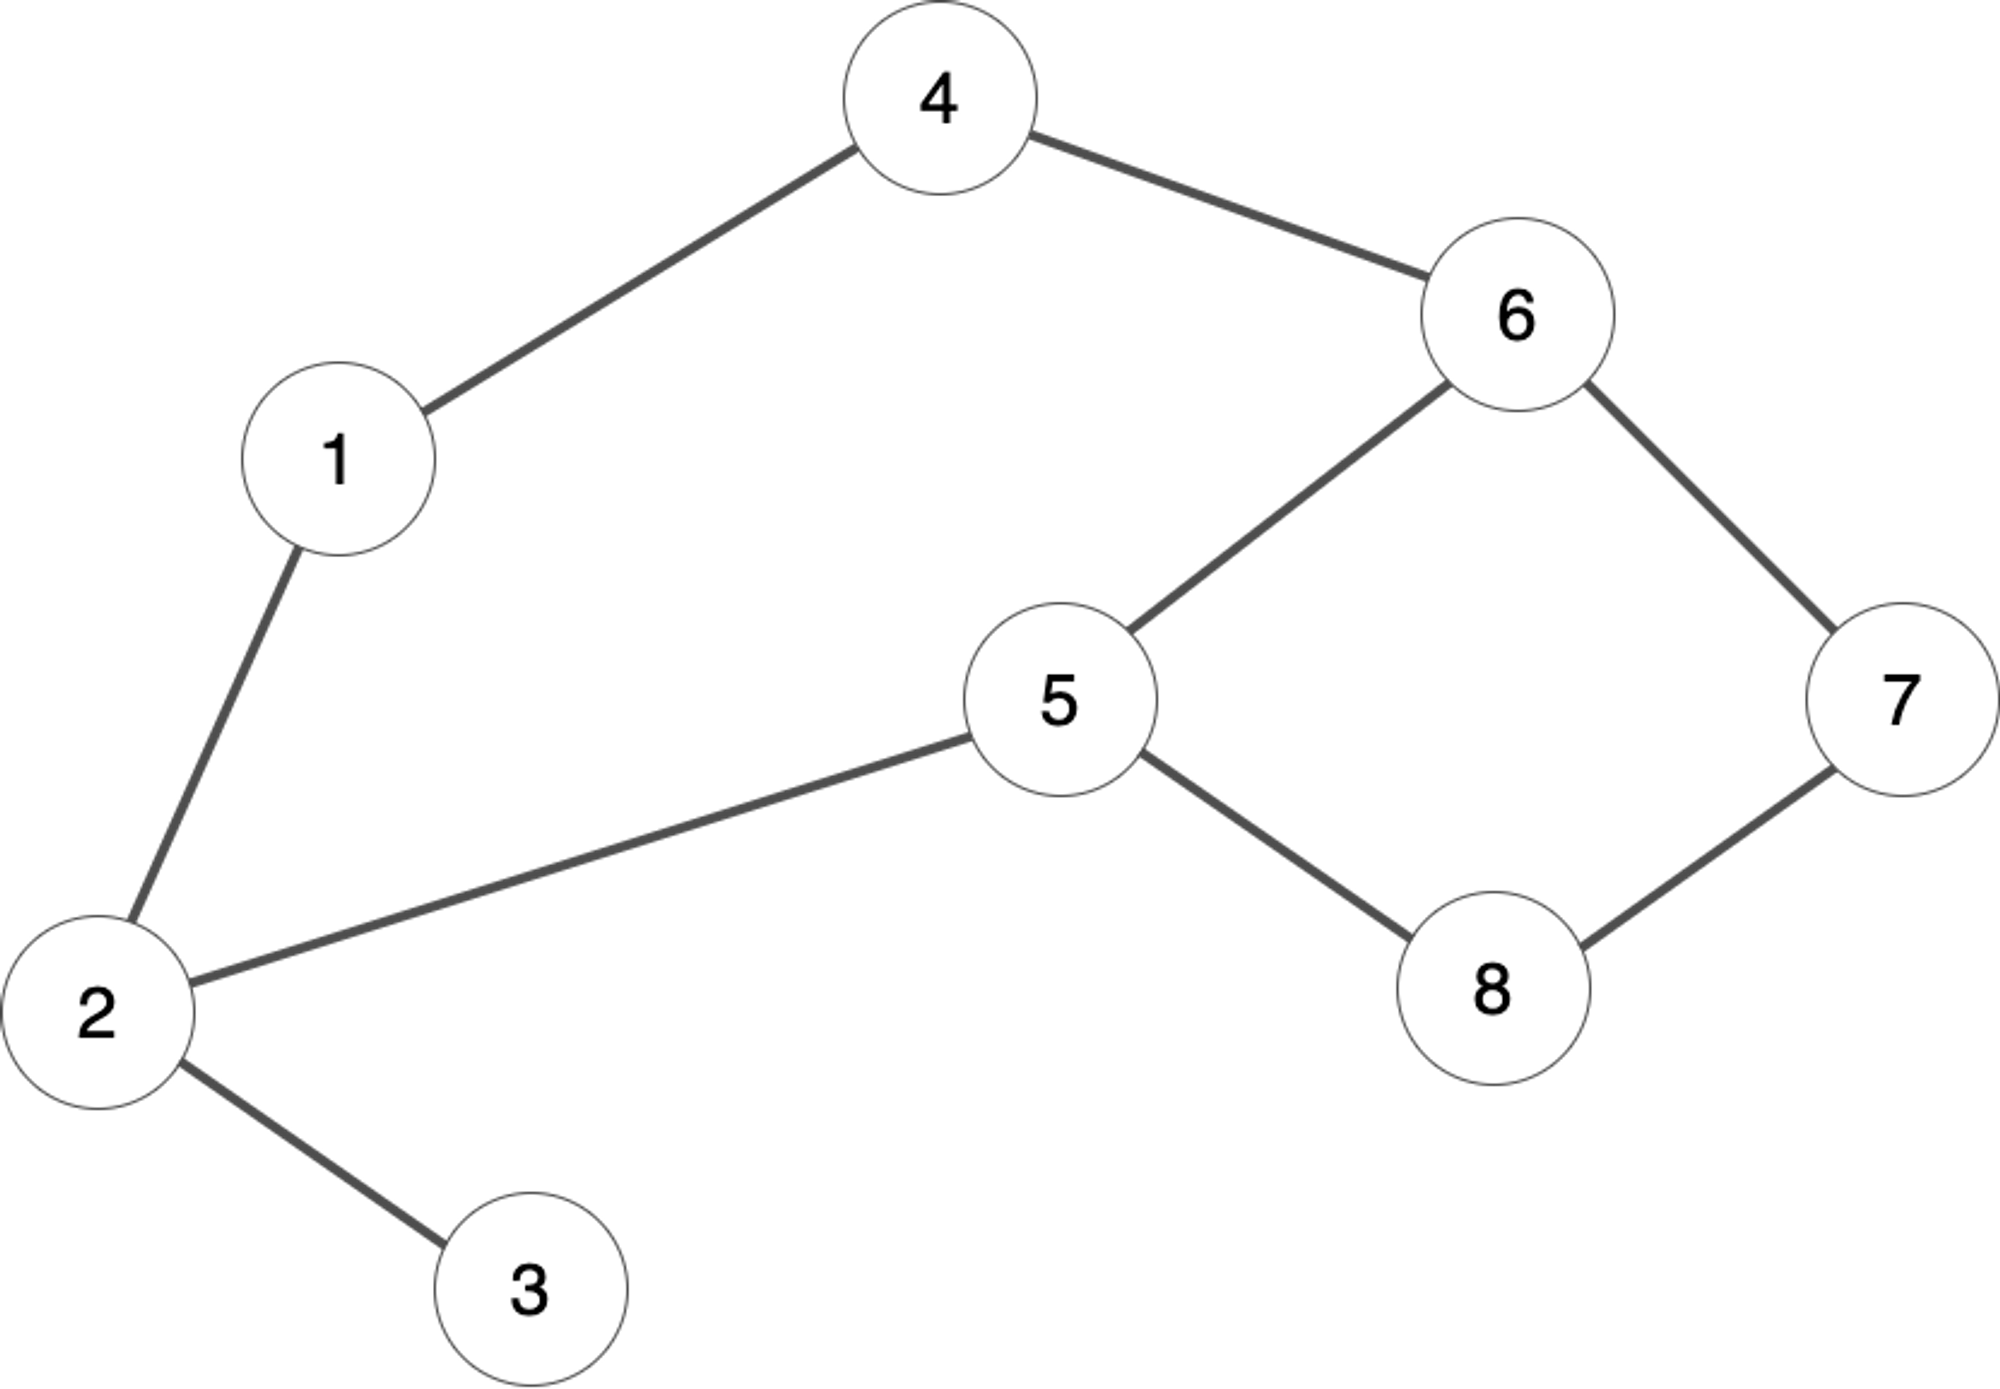 An undirected graph with 8 vertices and 9 edges